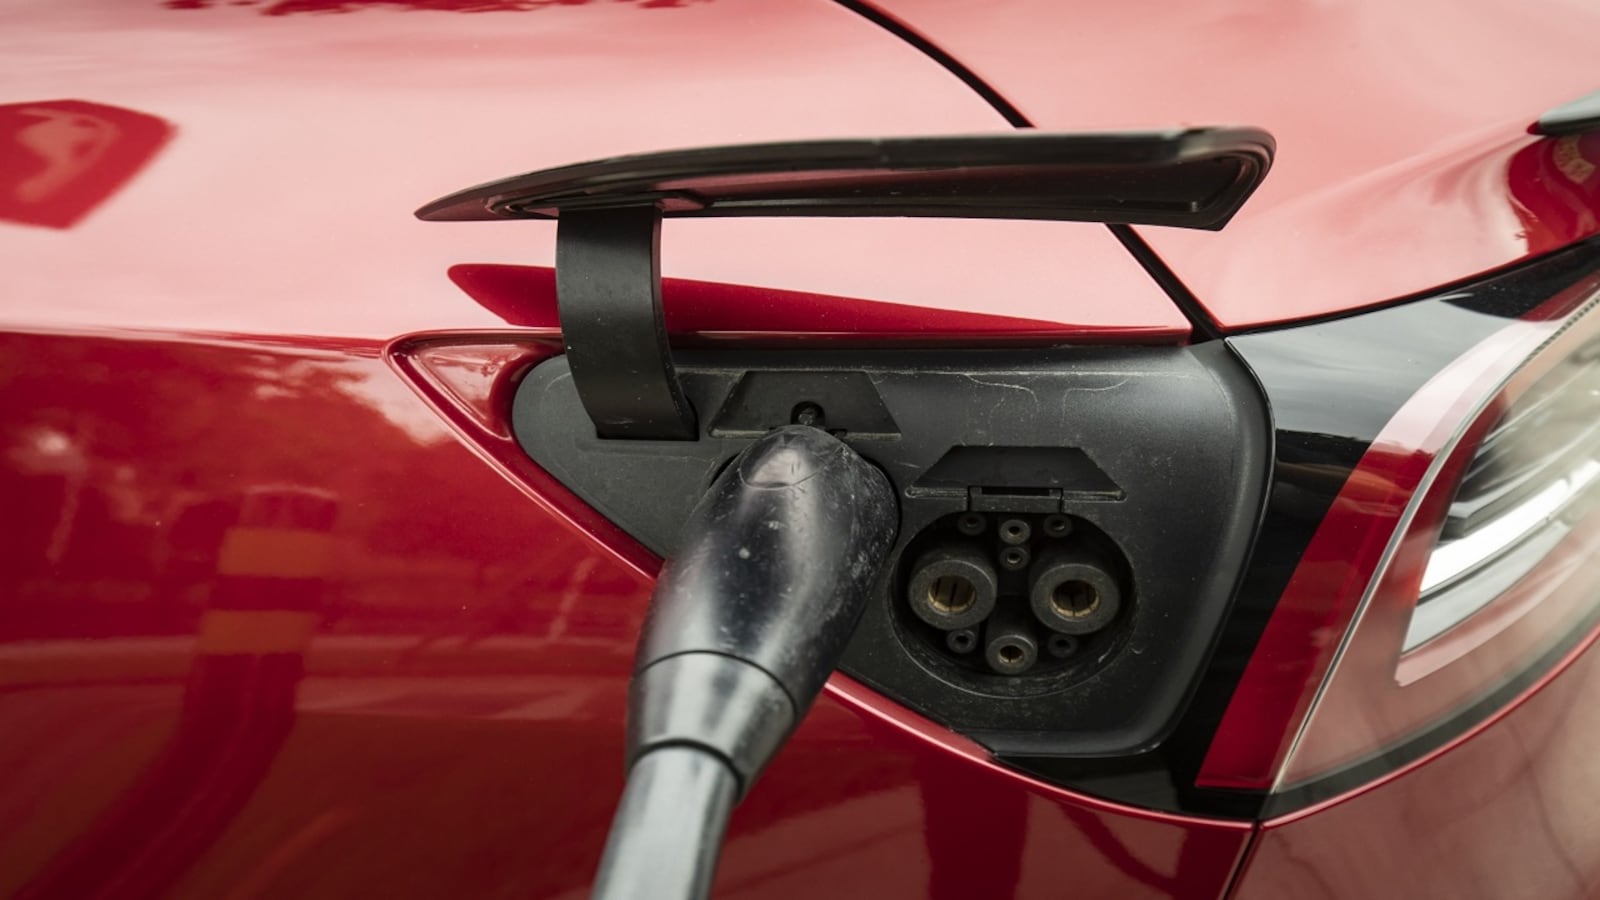 Tesla taking page from mobile plans with home charging for $30